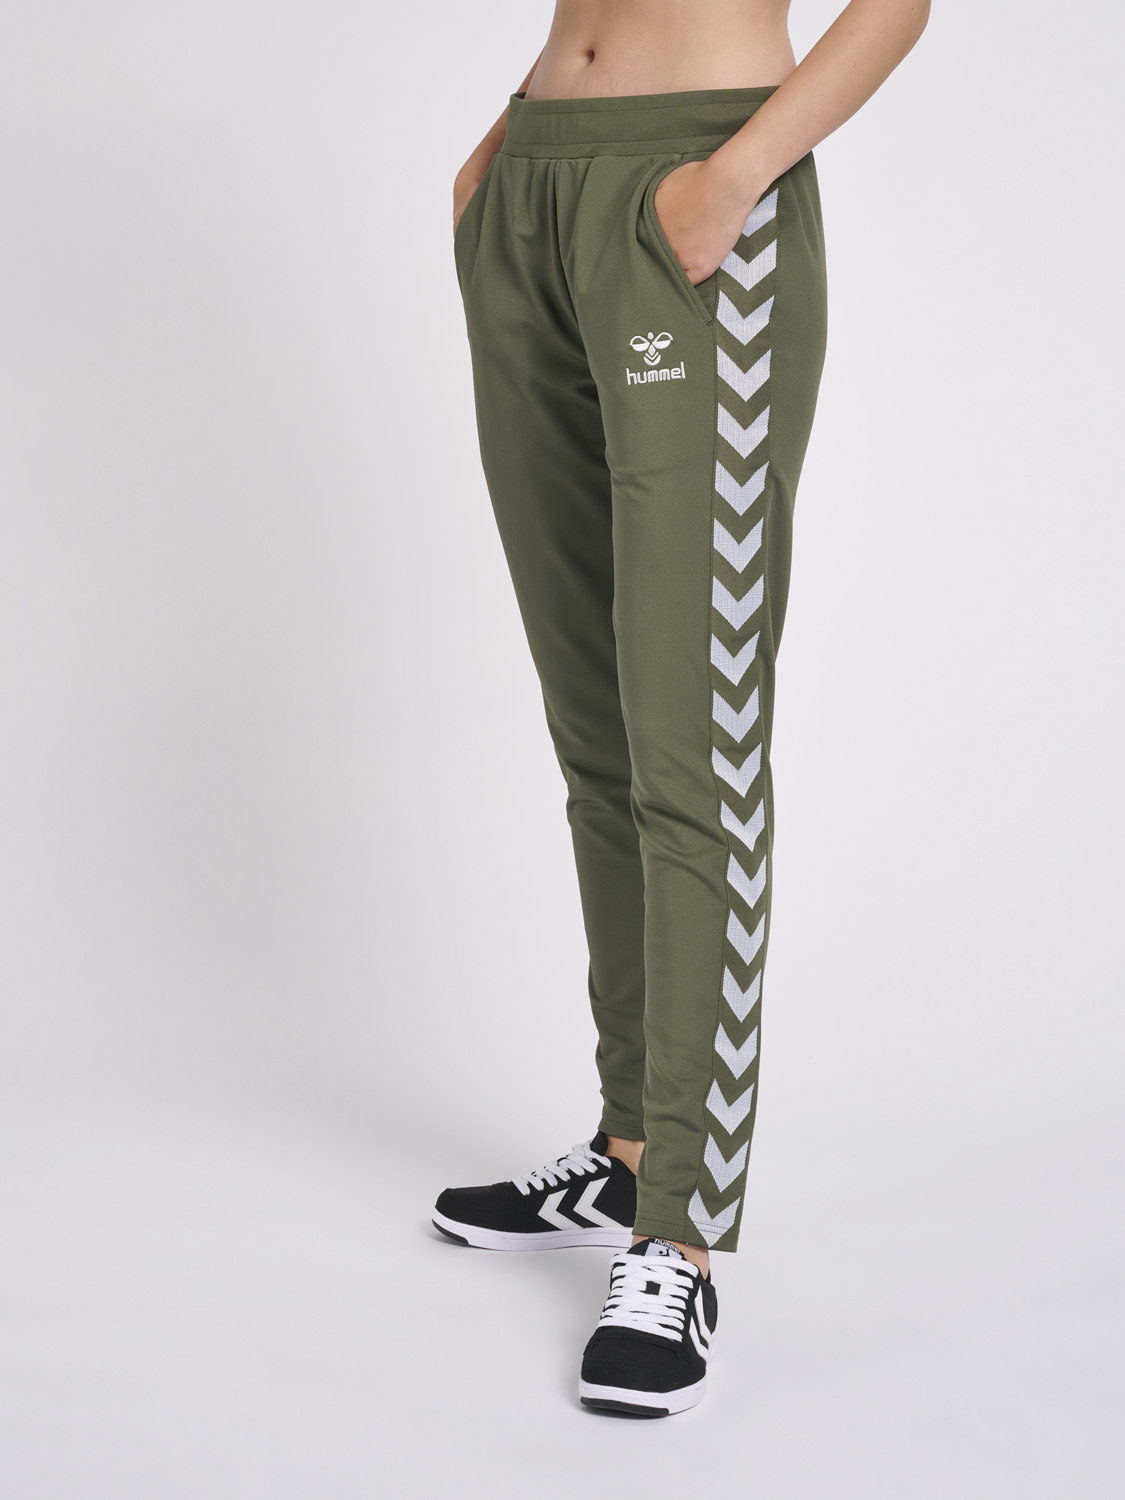 Og Opaque Arrowhead hmlNELLY 2.0 TAPERED PANTS